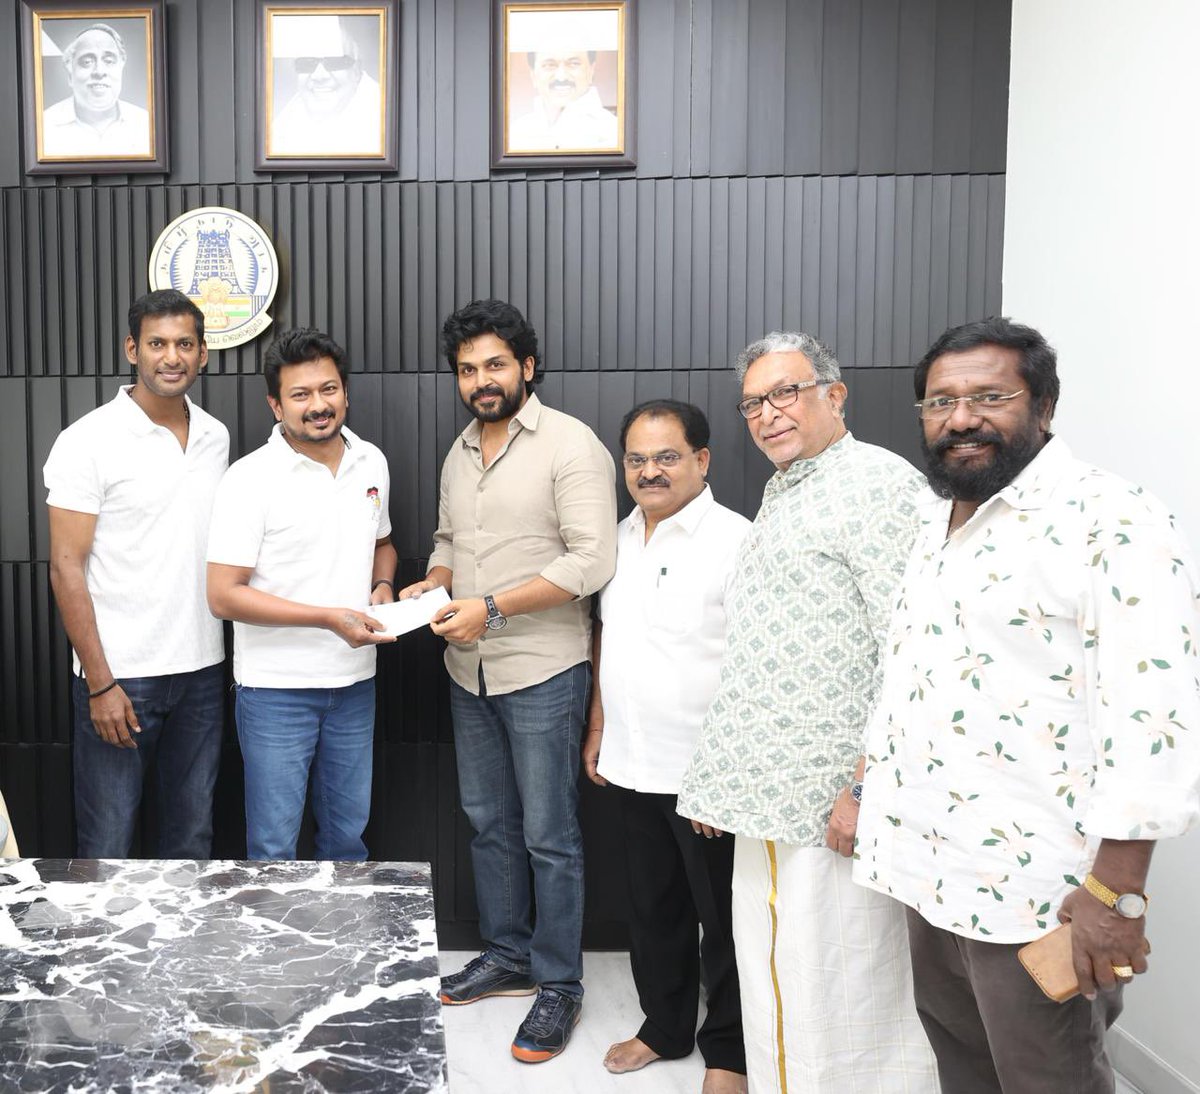 Dear Udhaya, I sincerely thank u as a friend, producer, actor and now sports minister of Tamil Nadu govt for your contribution to our South Indian artistes association building efforts and your willingness to finish it as early as possible and also coming forward to help in any…